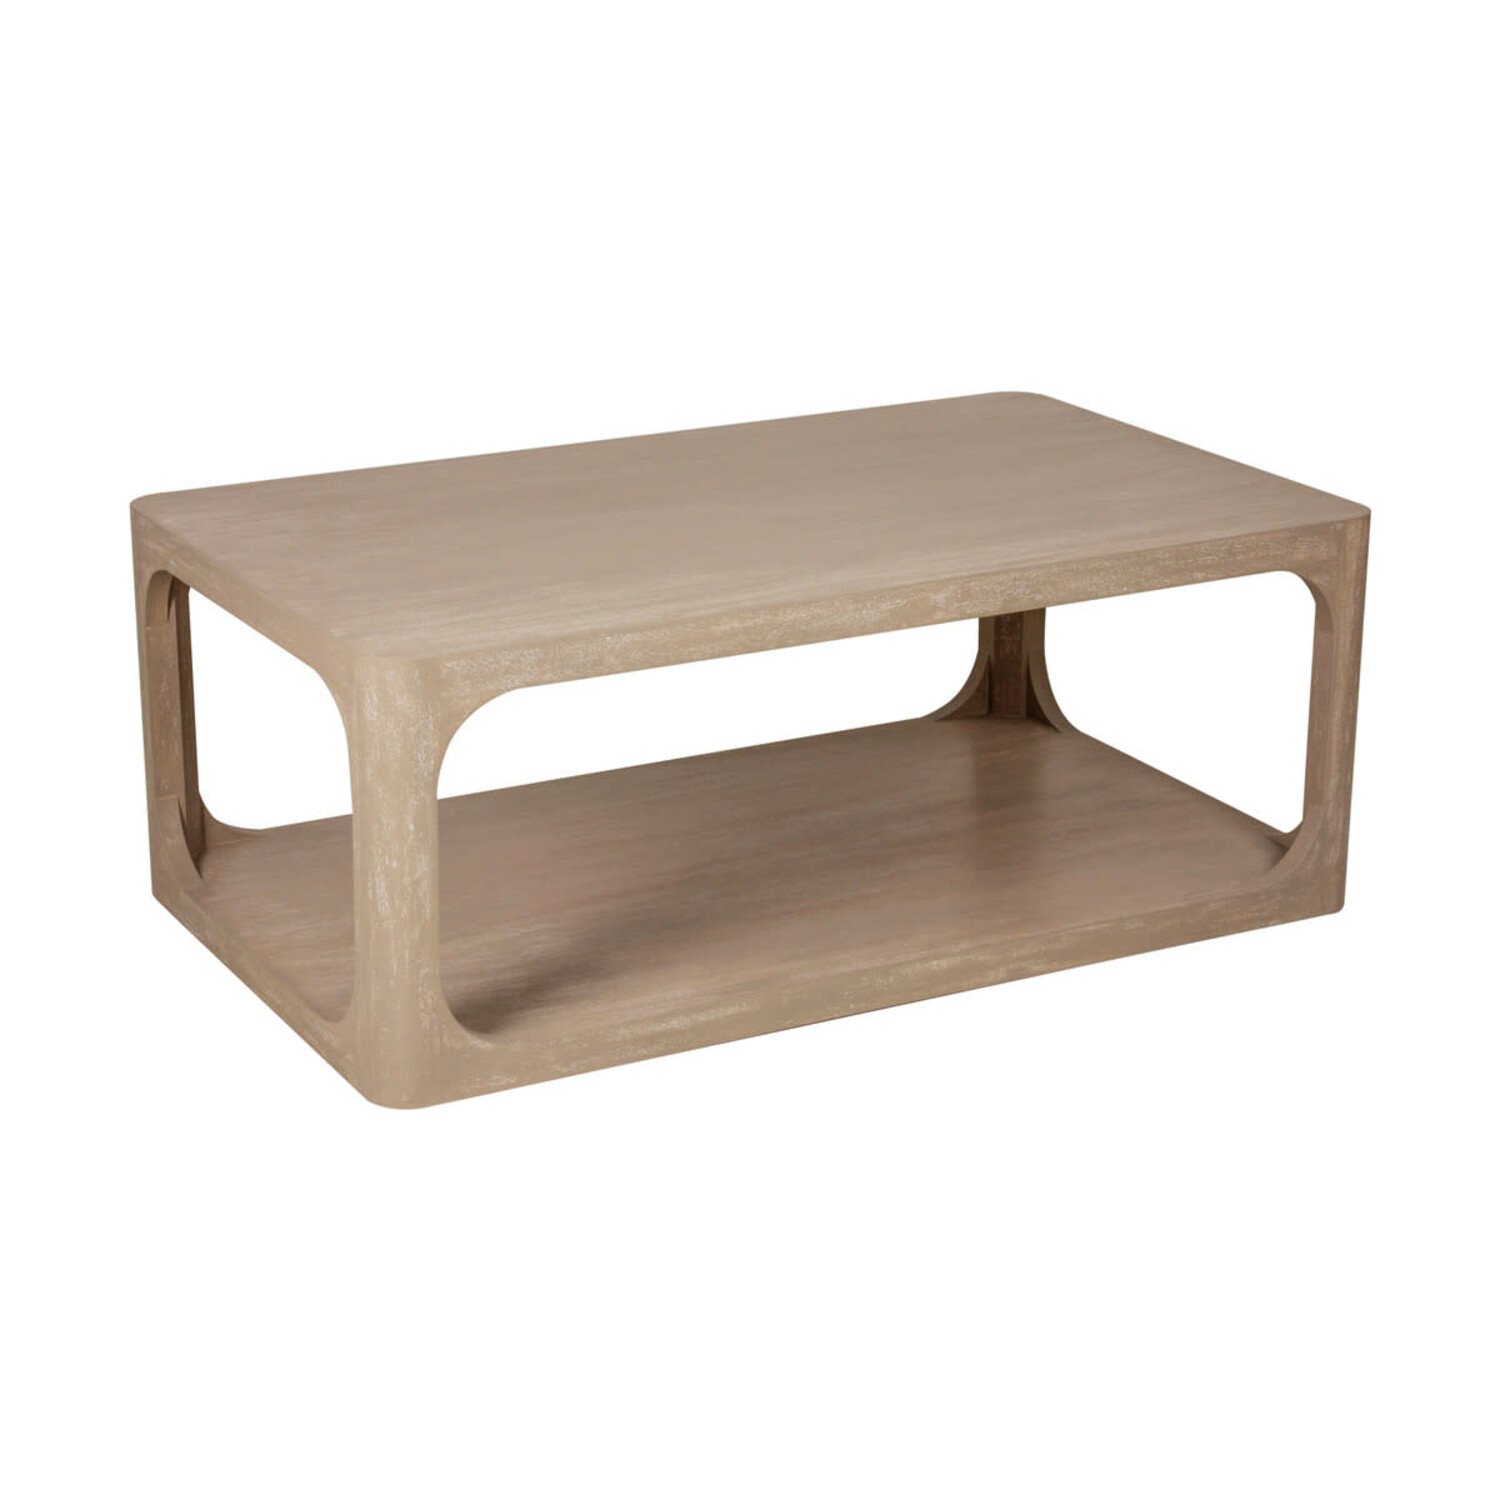 Archie 47 Mango Wood Coffee Table, Taupe Finish - Jes & Gray Living